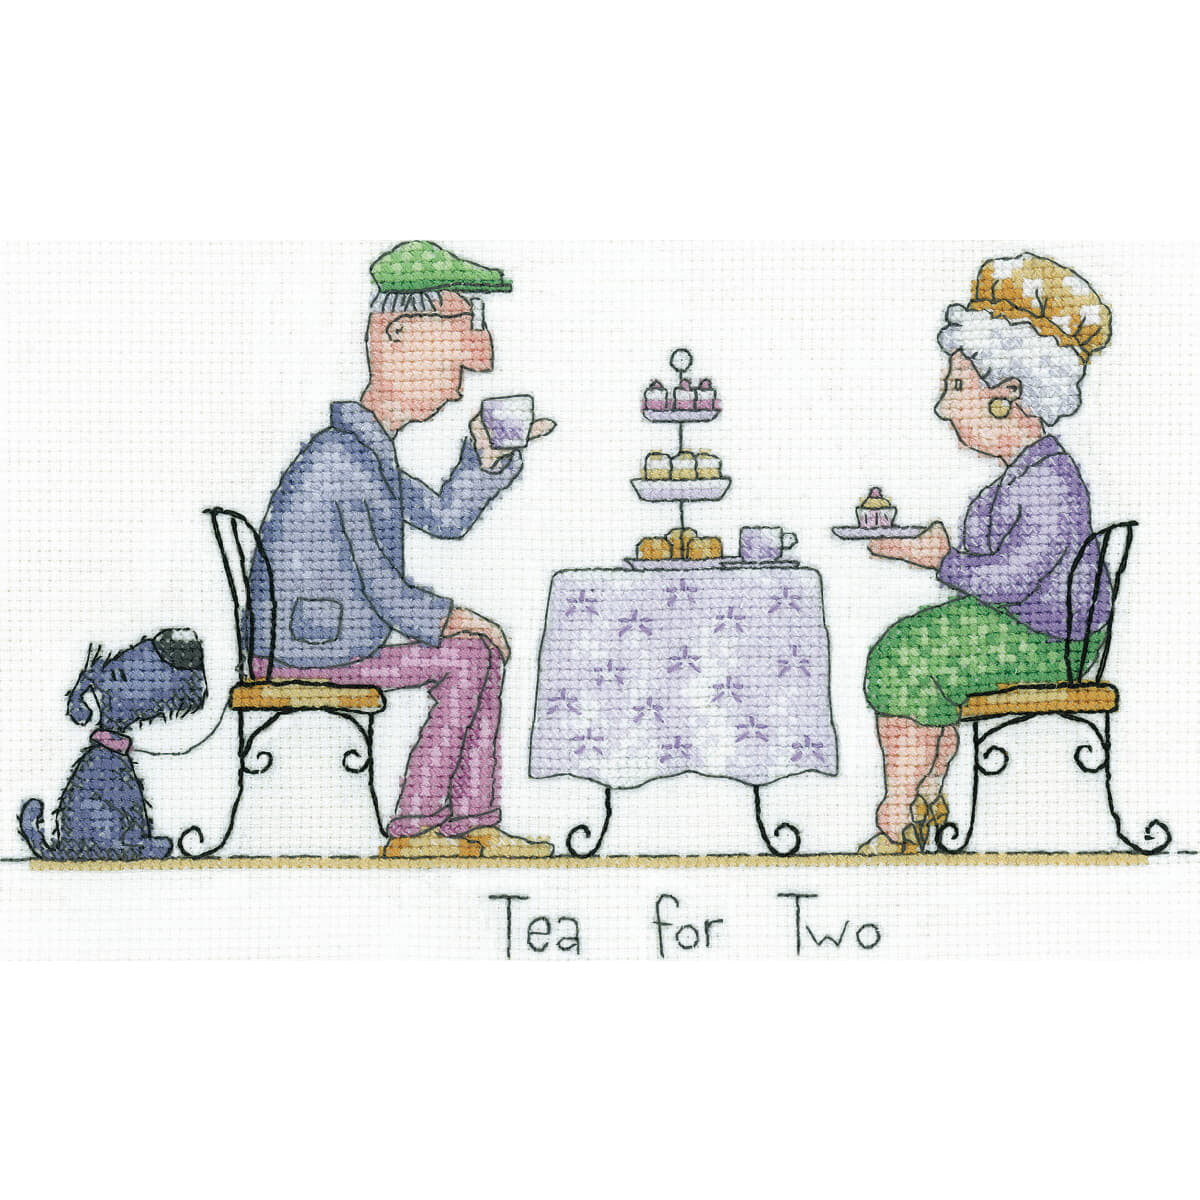 Heritage counted cross stitch kit Aida "Tea for...